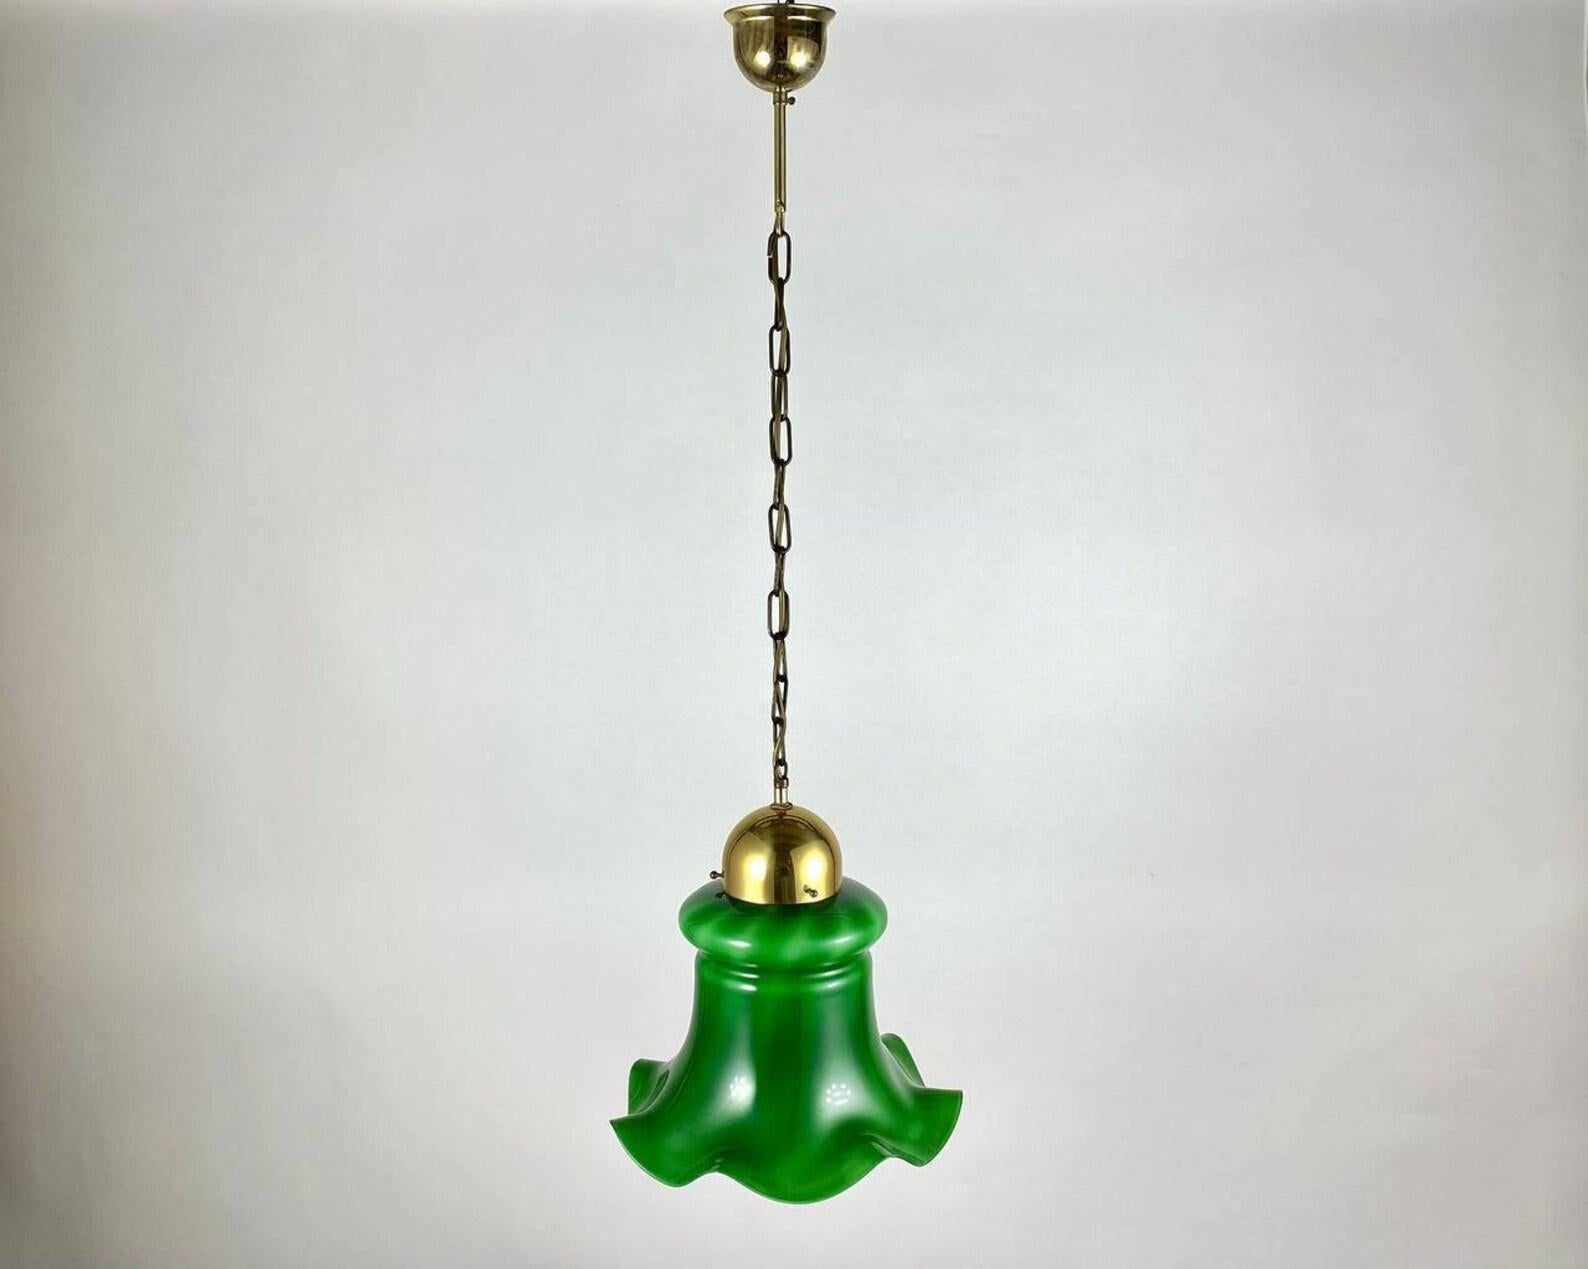 Green glass and gilt brass pendant light manufactured in Belgium, circa the 1980s.

 The elegant, stylish pendant lamp is a functional interior solution. The metal parts of the lamp are made of brass with gilding. The lampshade is beautifully